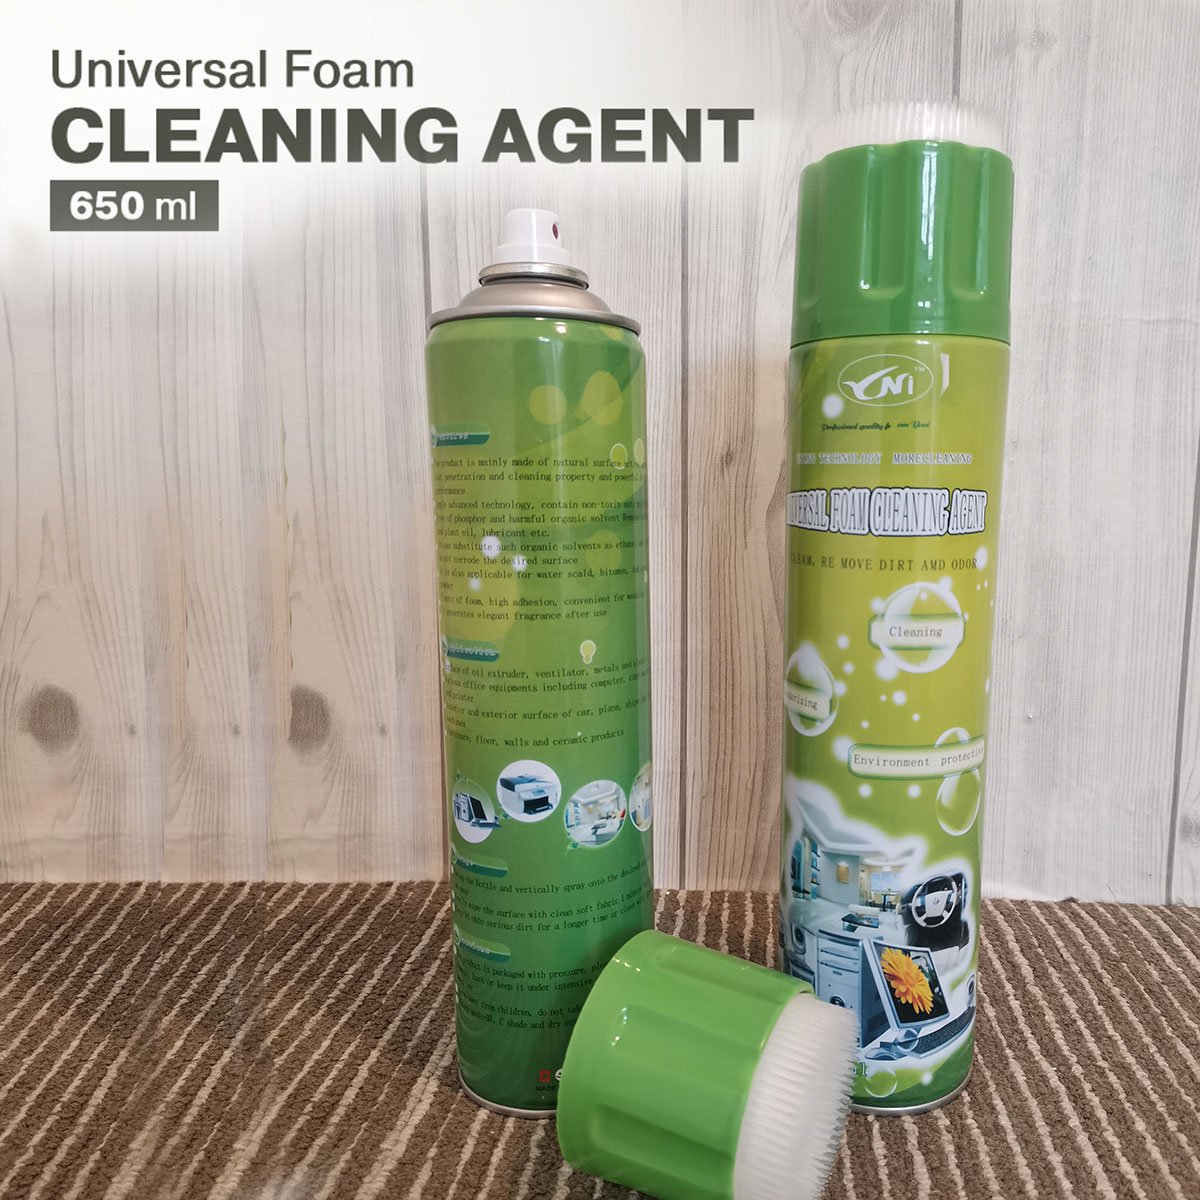 Car Foam Cleaner 650ml Interior Detergent Home Dual Use Cleaning Agent